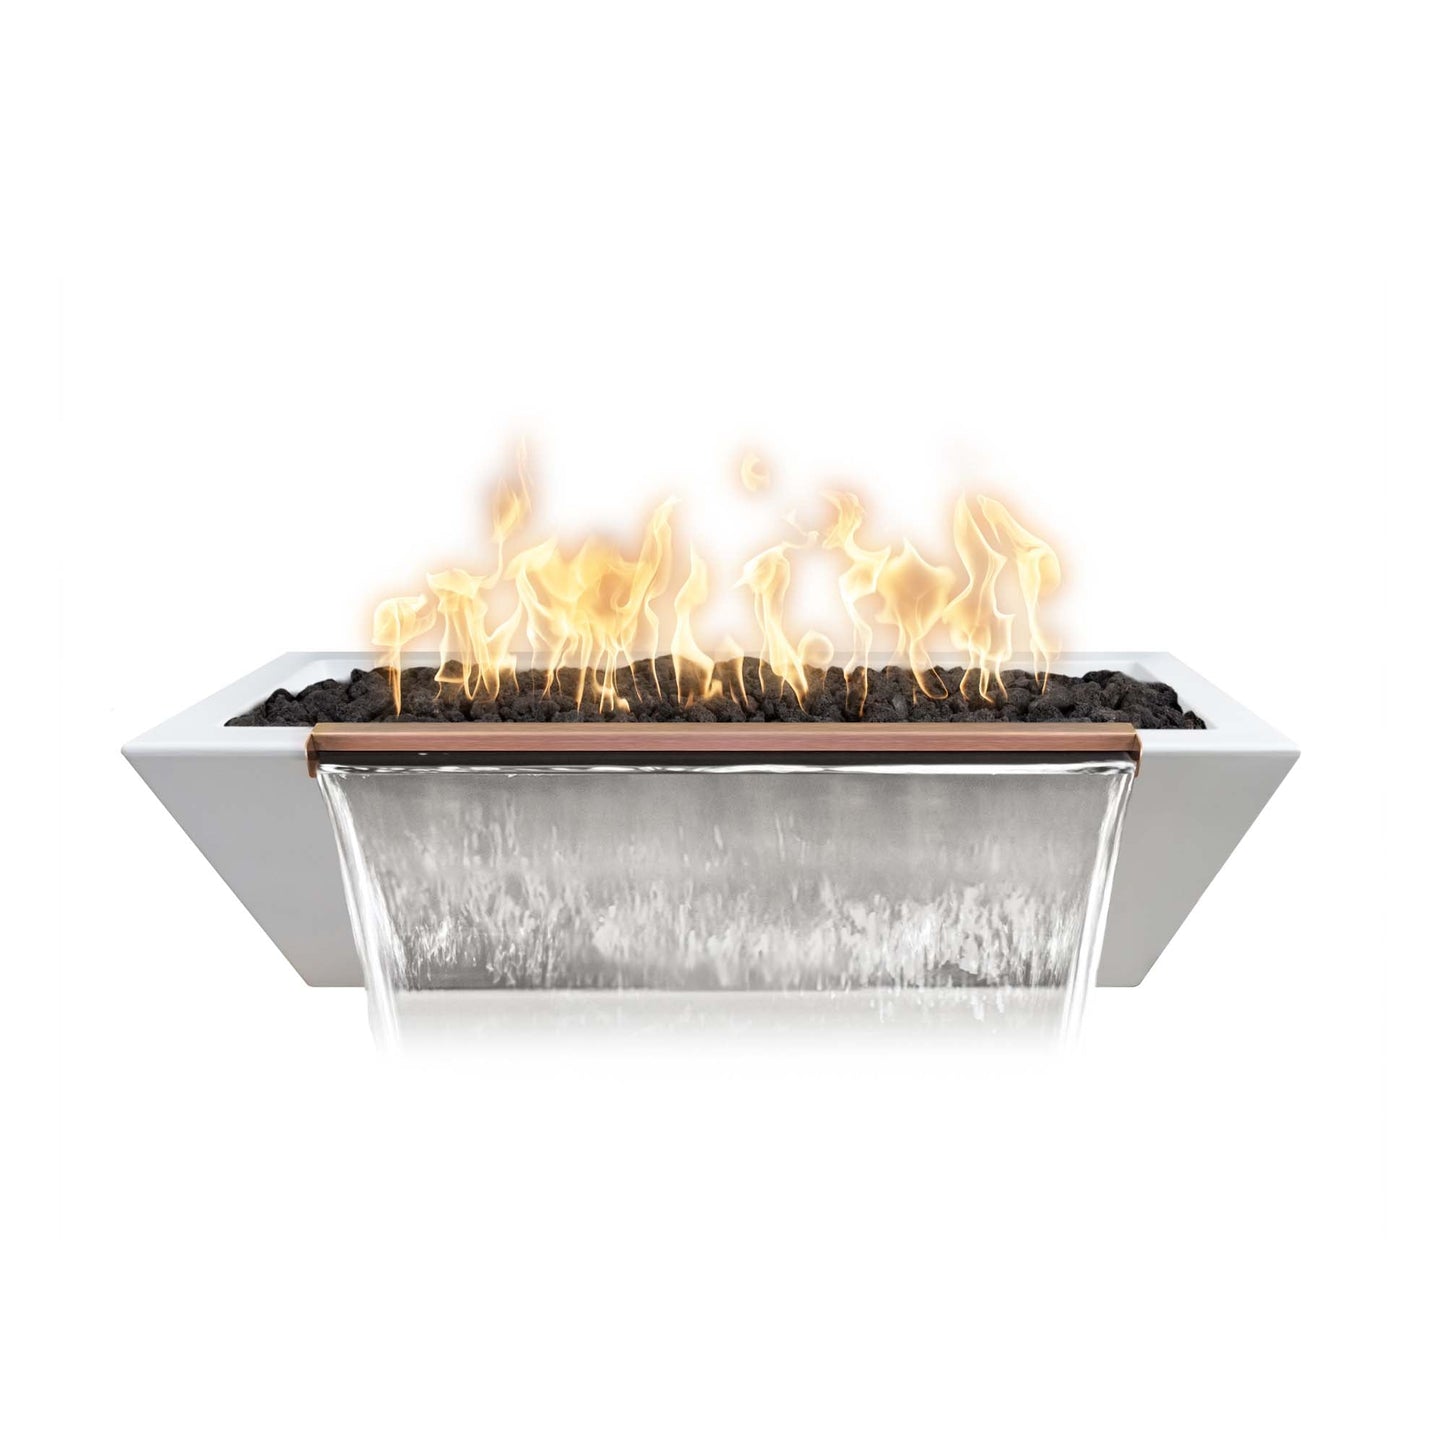 The Outdoor Plus Linear Maya 72" Chocolate GFRC Concrete Natural Gas Fire & Water Bowl with Match Lit Ignition